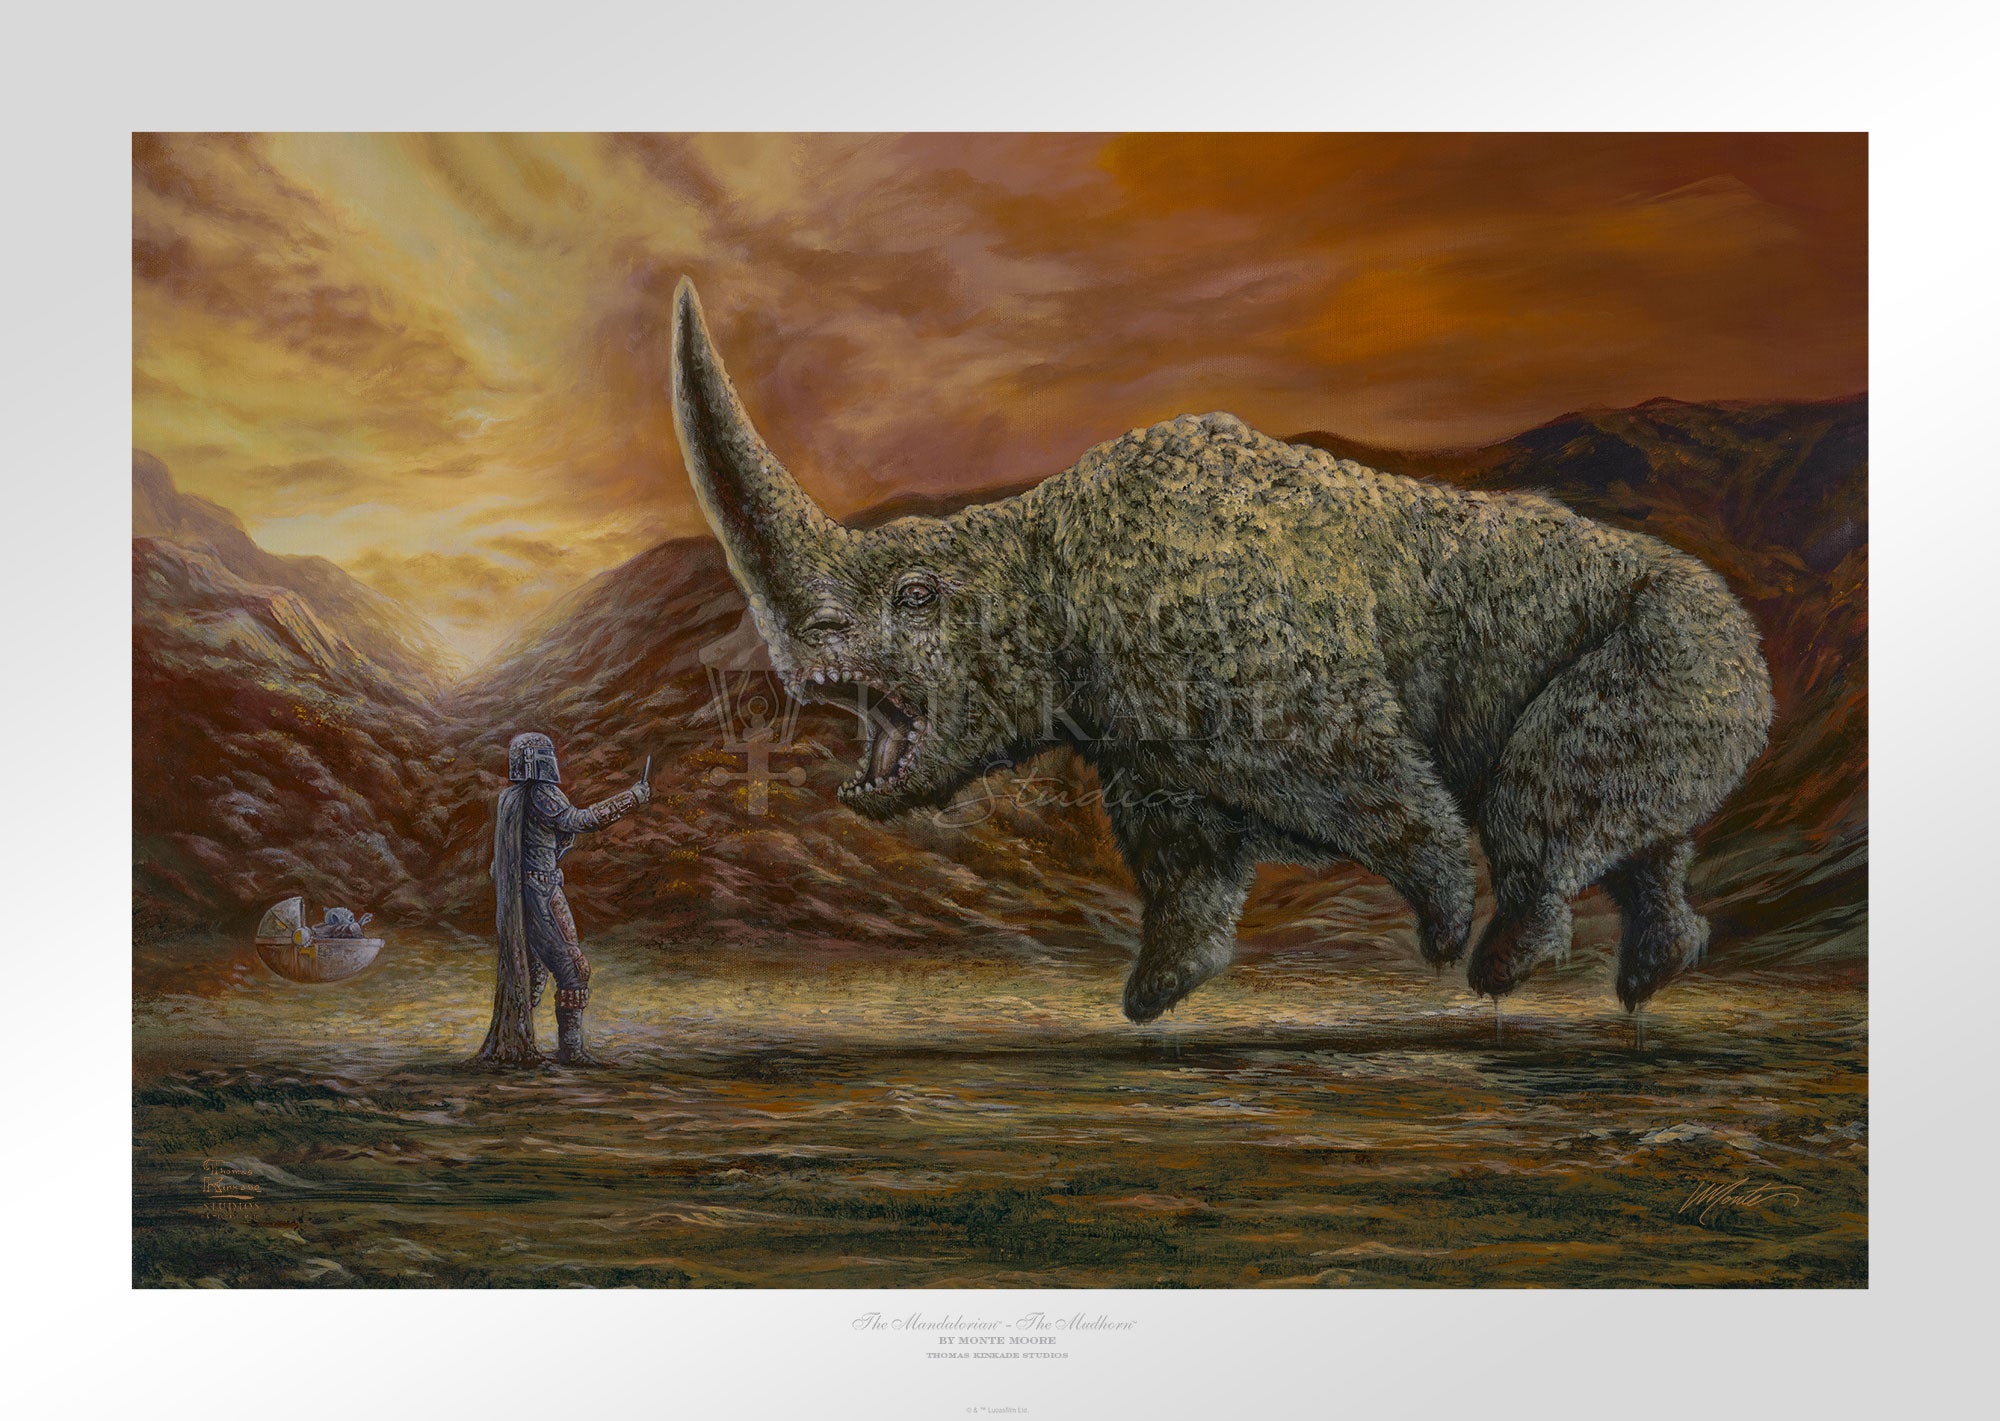 Mando and the Child confronts the Mudhorn beast. - Unframed Paper